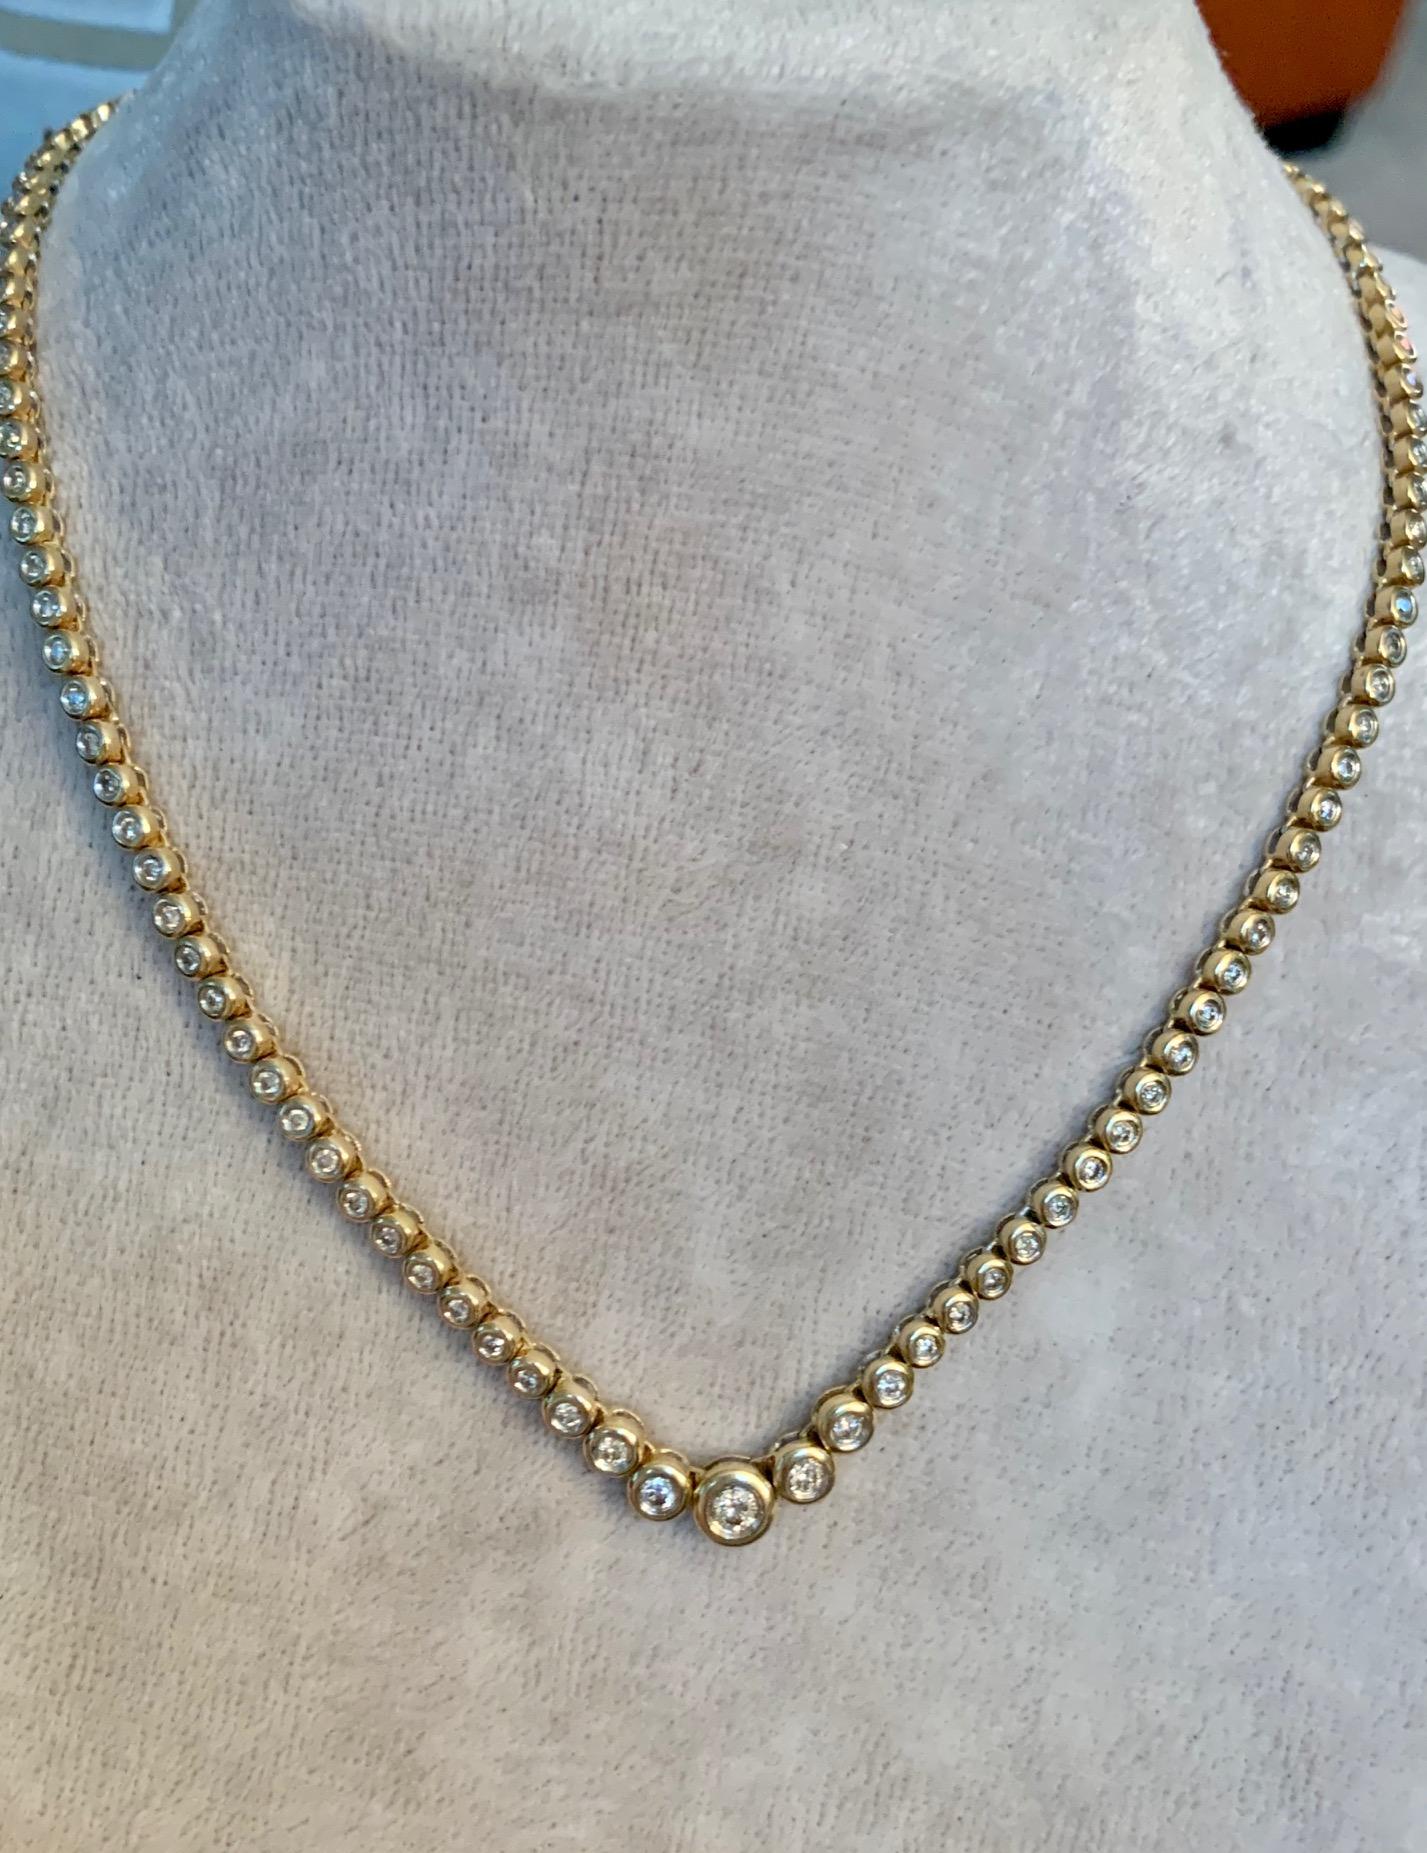 This beautiful 14k yellow Gold tennis necklace is absolutely stunning!  There 110 brilliant cut Diamonds which circle completely around the 16